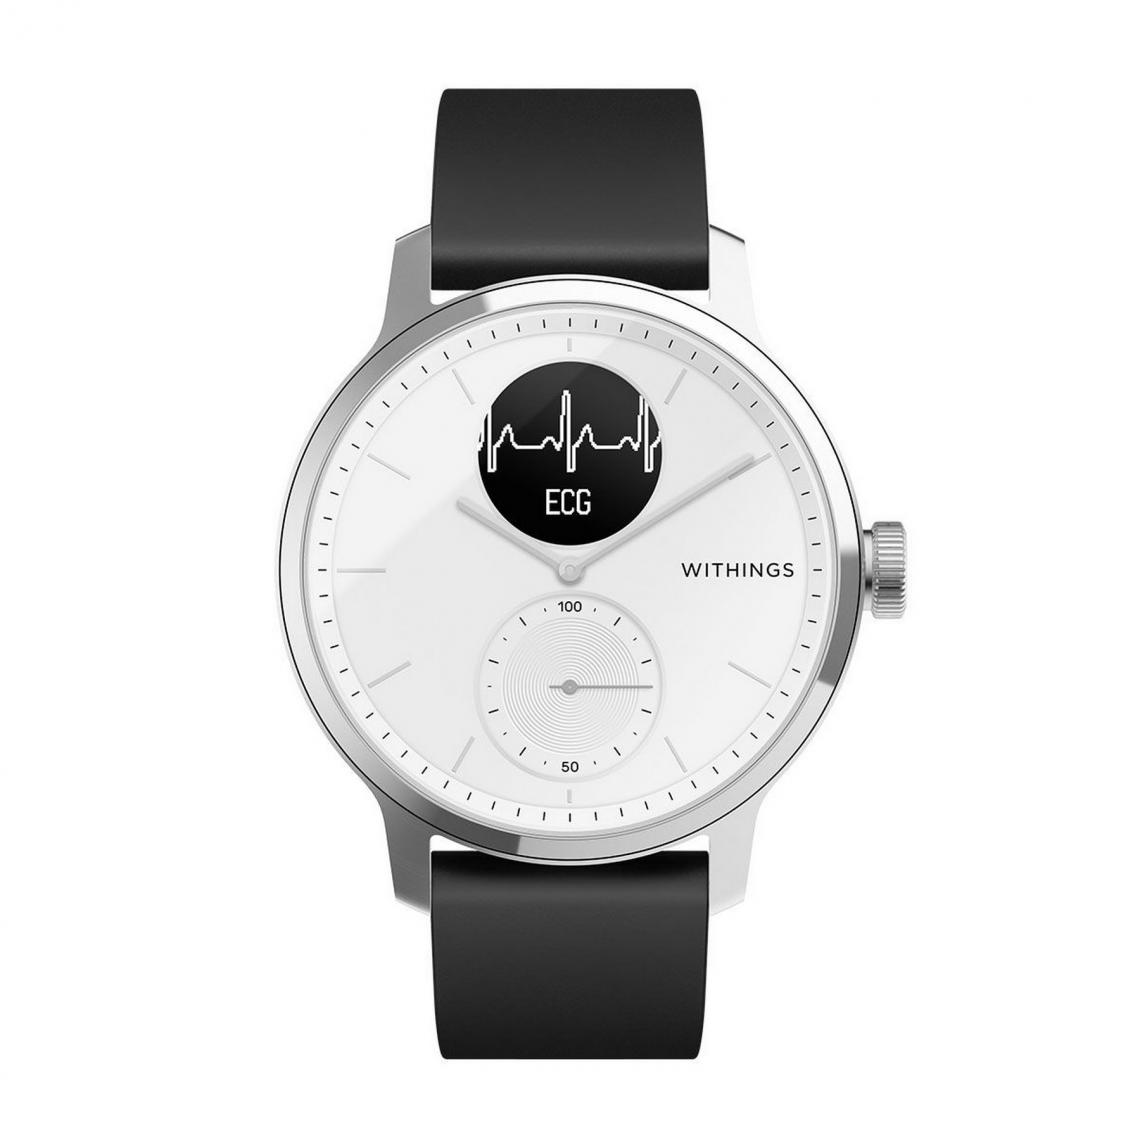 Withings - Montre connectée Homme WITHINGS Montres SCANWATCH 3 Aiguilles - Induction HWA09-model 3-All-Int - Bracelet Silicone Noir - Montre connectée